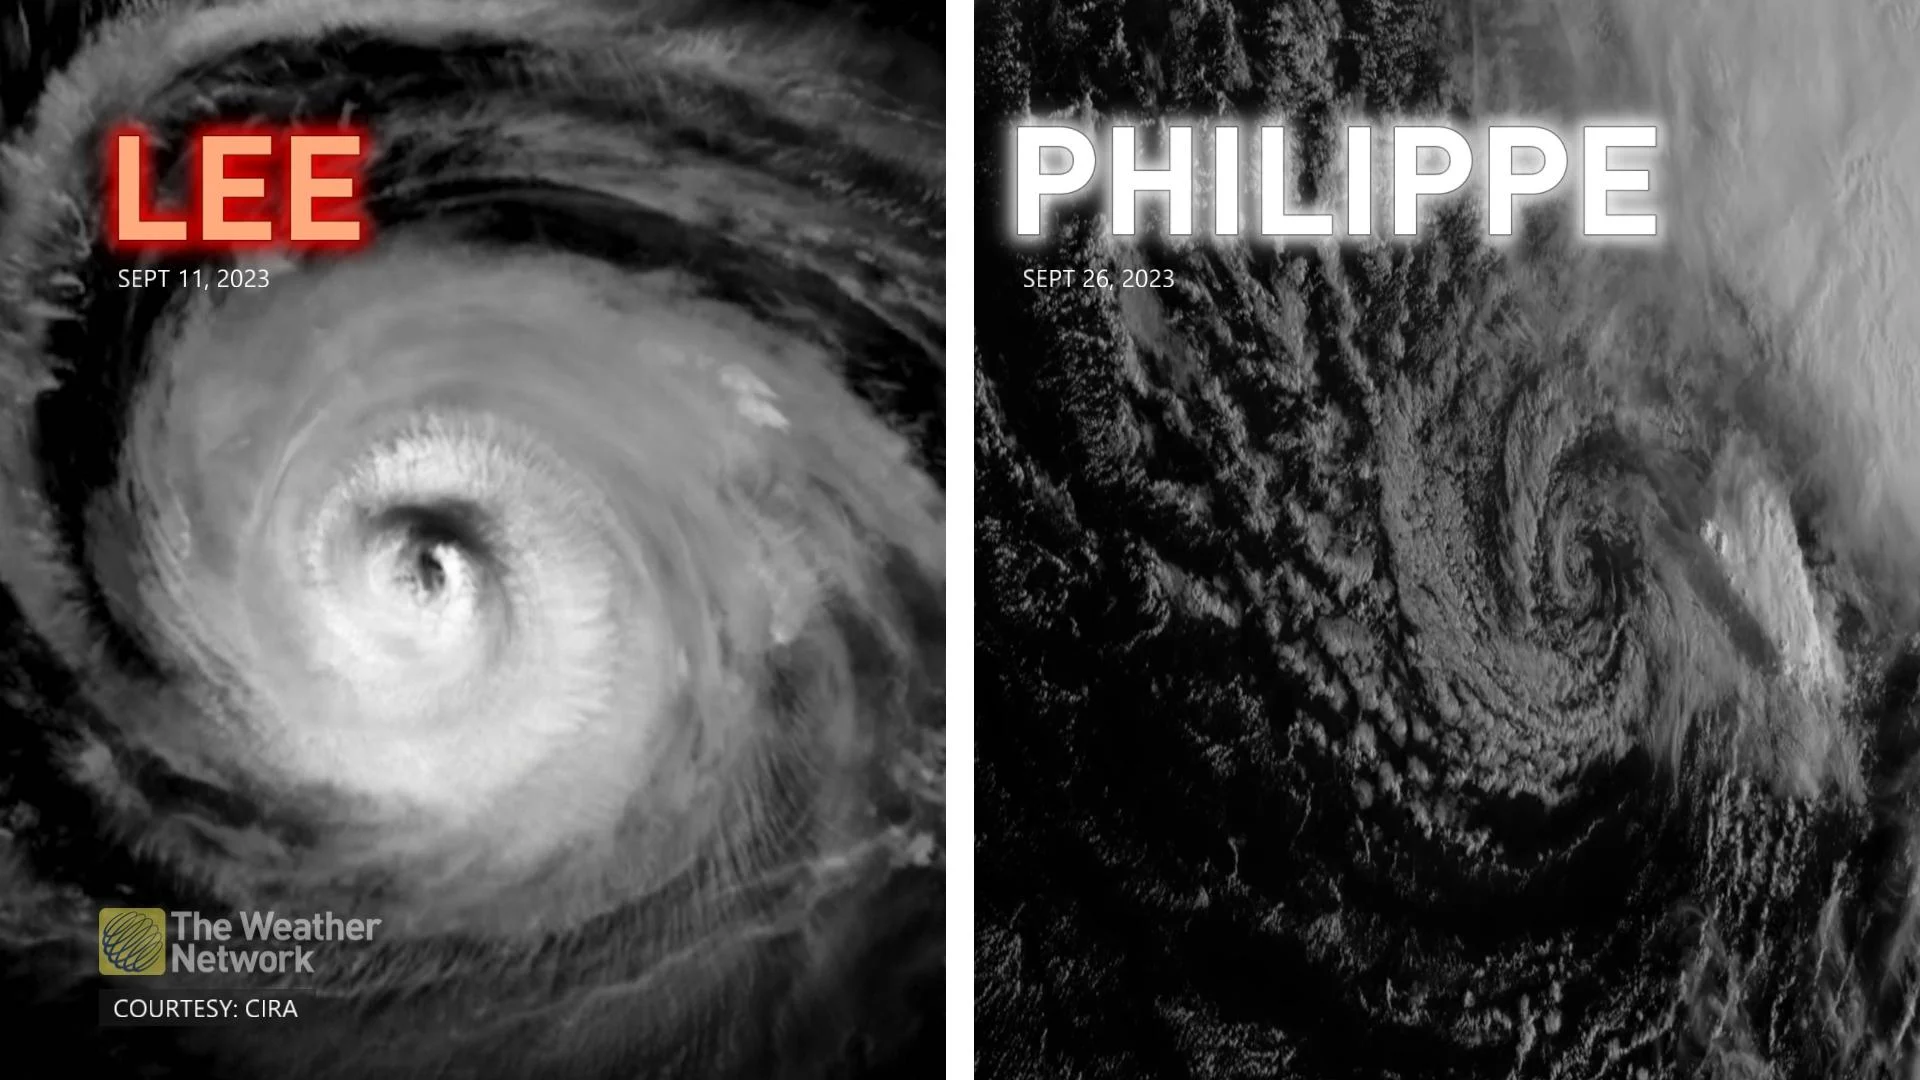 Hurricane Lee Tropical Storm Philippe Satellite Images